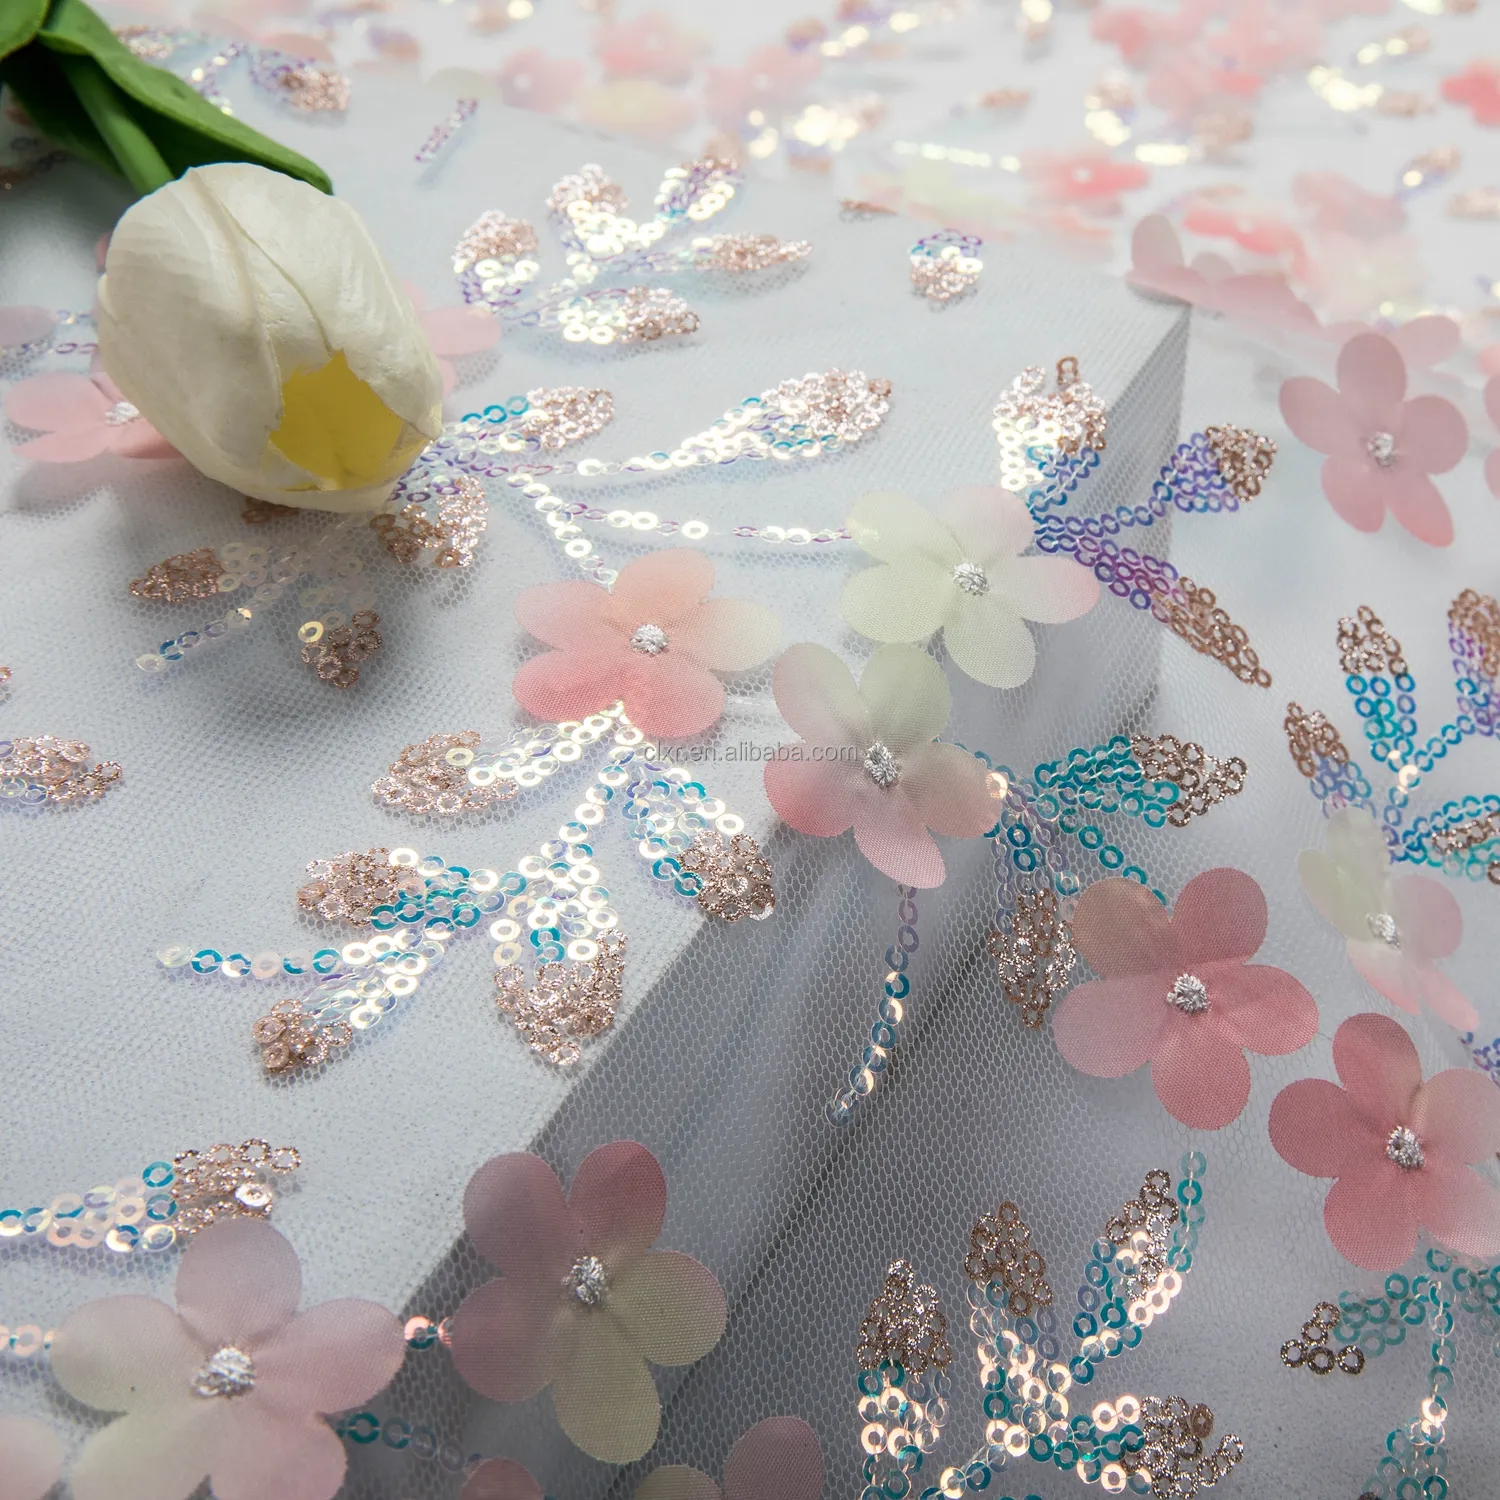 Fabric Supplier Hot Selling Sequin Bridal Embroidery Tulle 3D Lace Mesh Wedding Dress Flower Embroidery Fabric